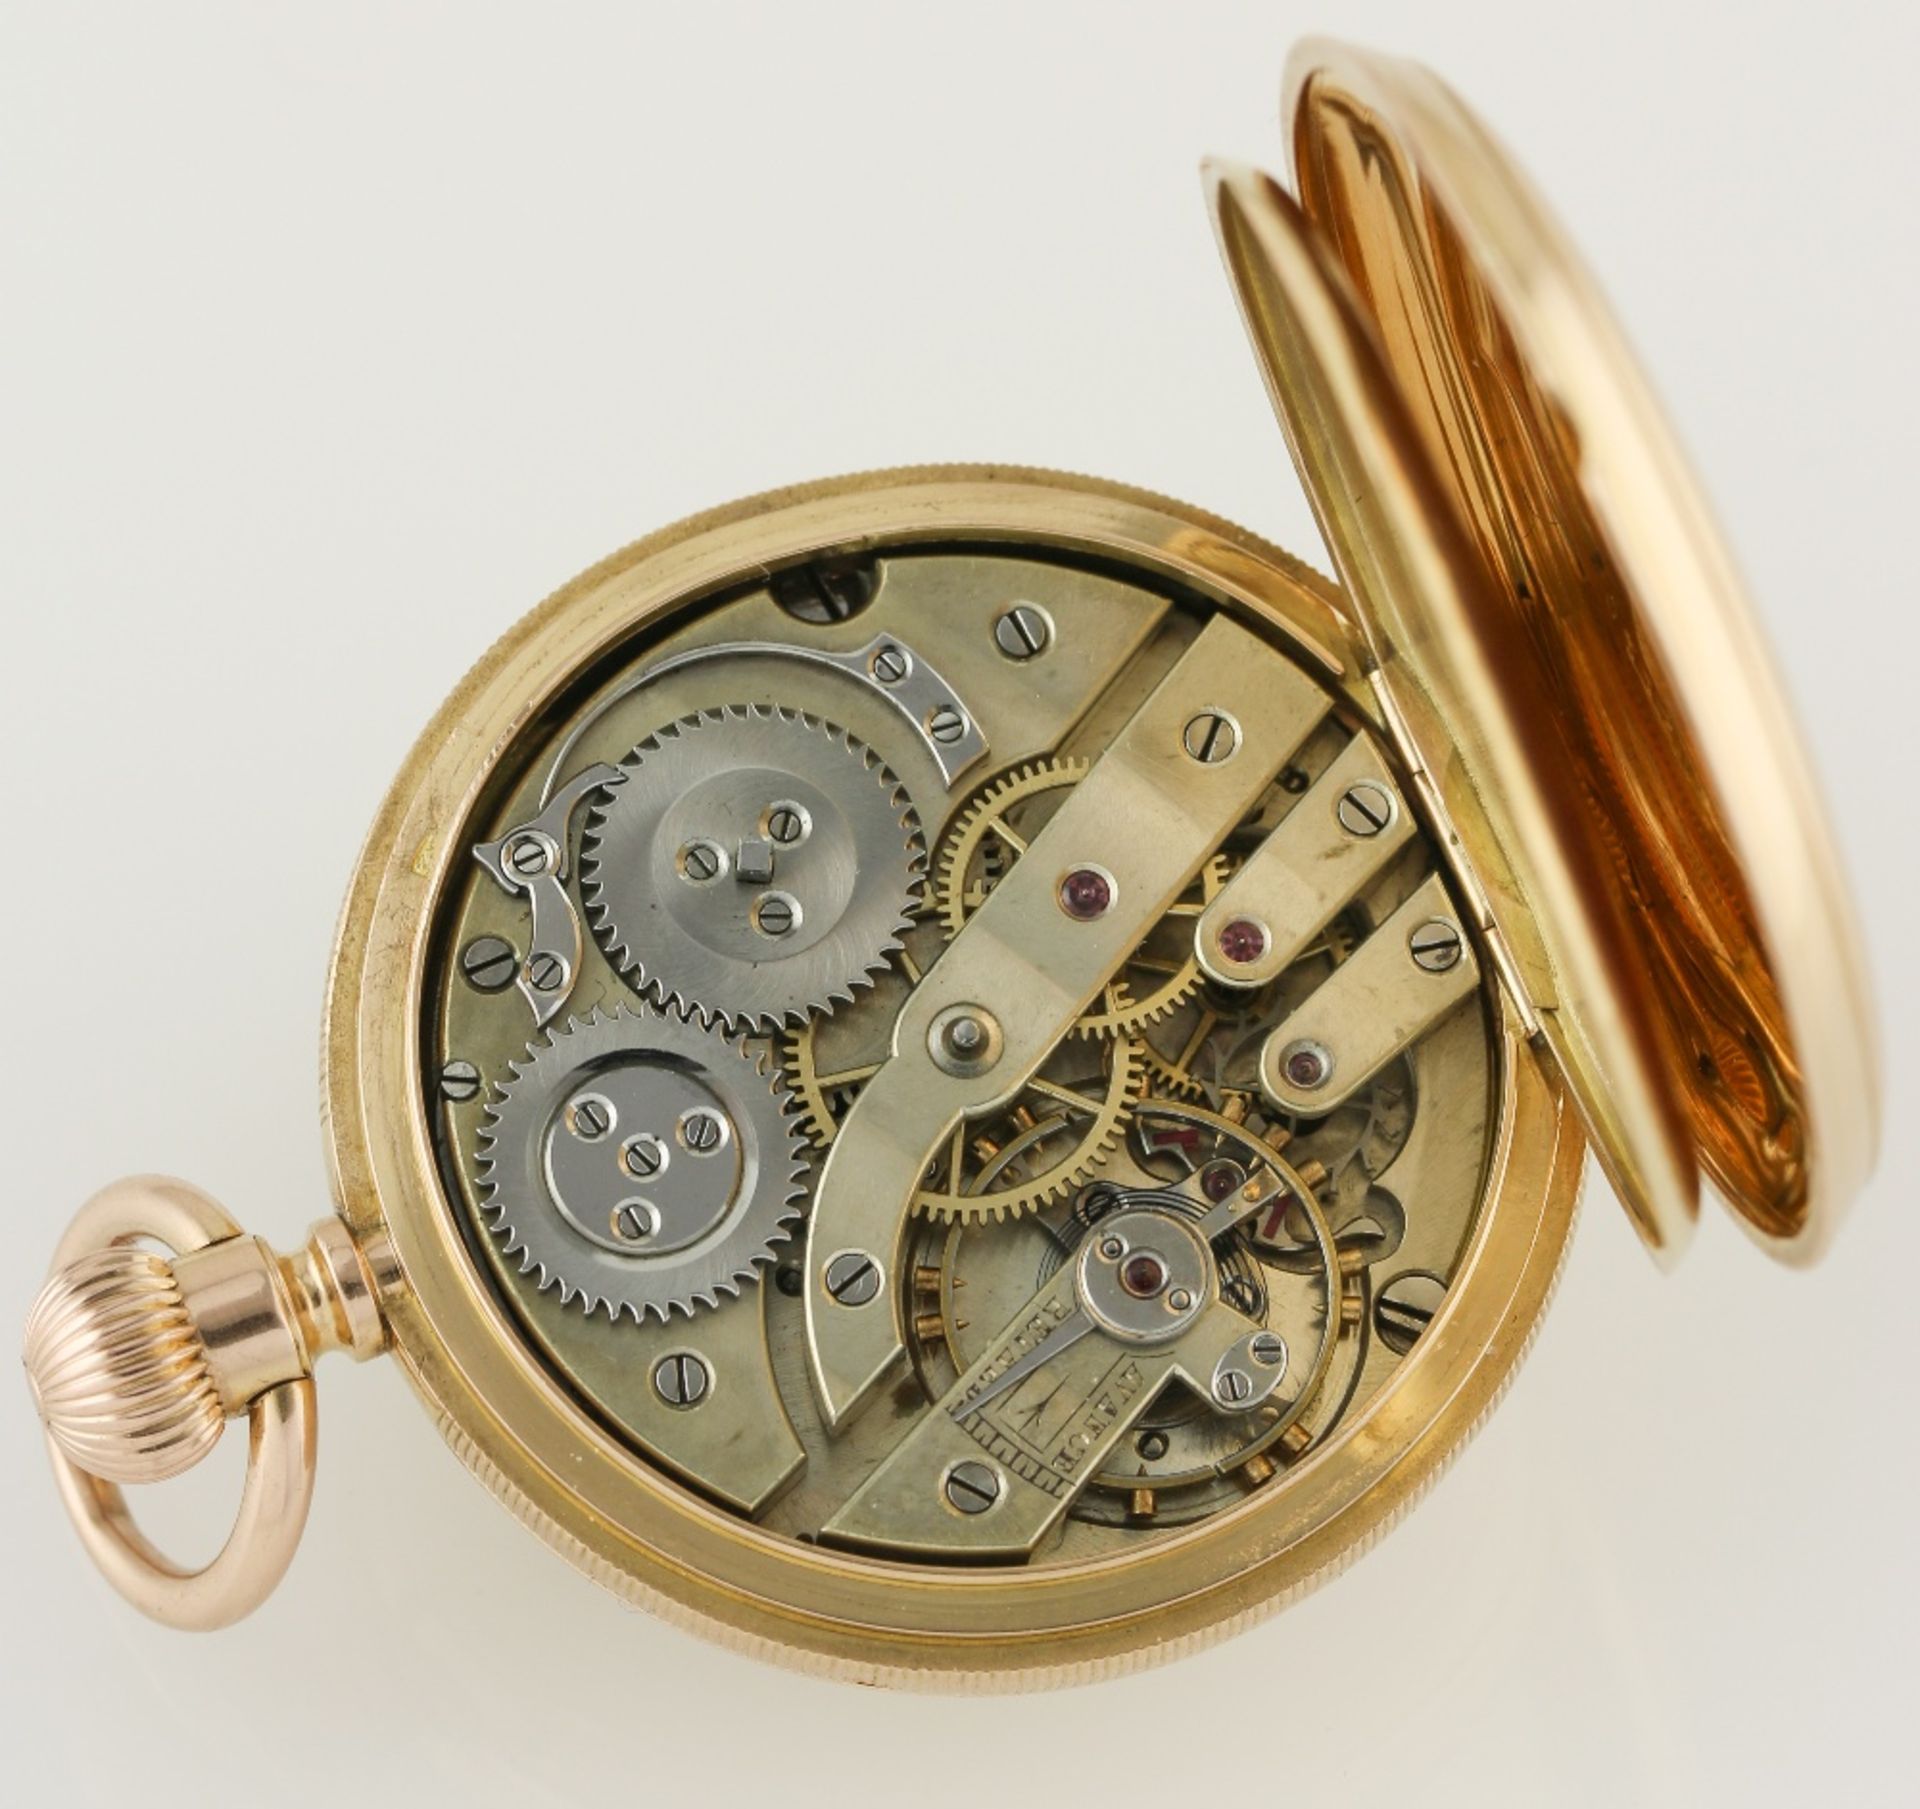 A LADIES 18K SOLID GOLD PATEK PHILIPPE HALF HUNTER POCKET WATCH CIRCA 1910, REF. 67120 MADE FOR A. - Image 6 of 9